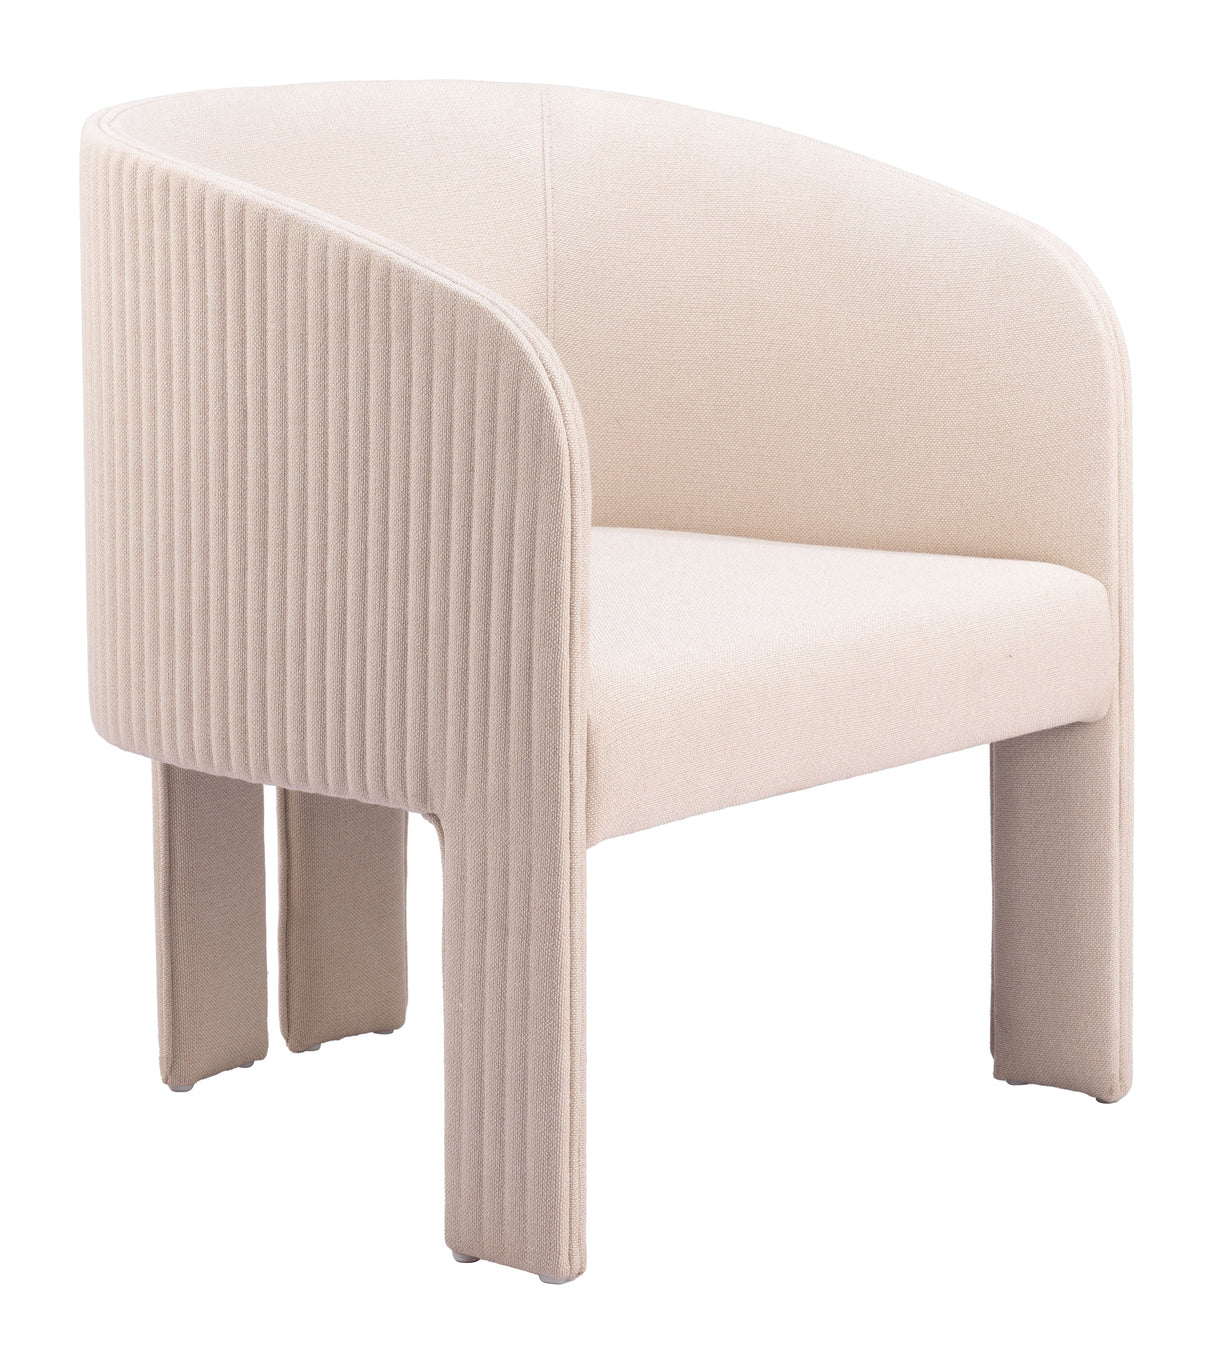 Hull Accent Chair Beige